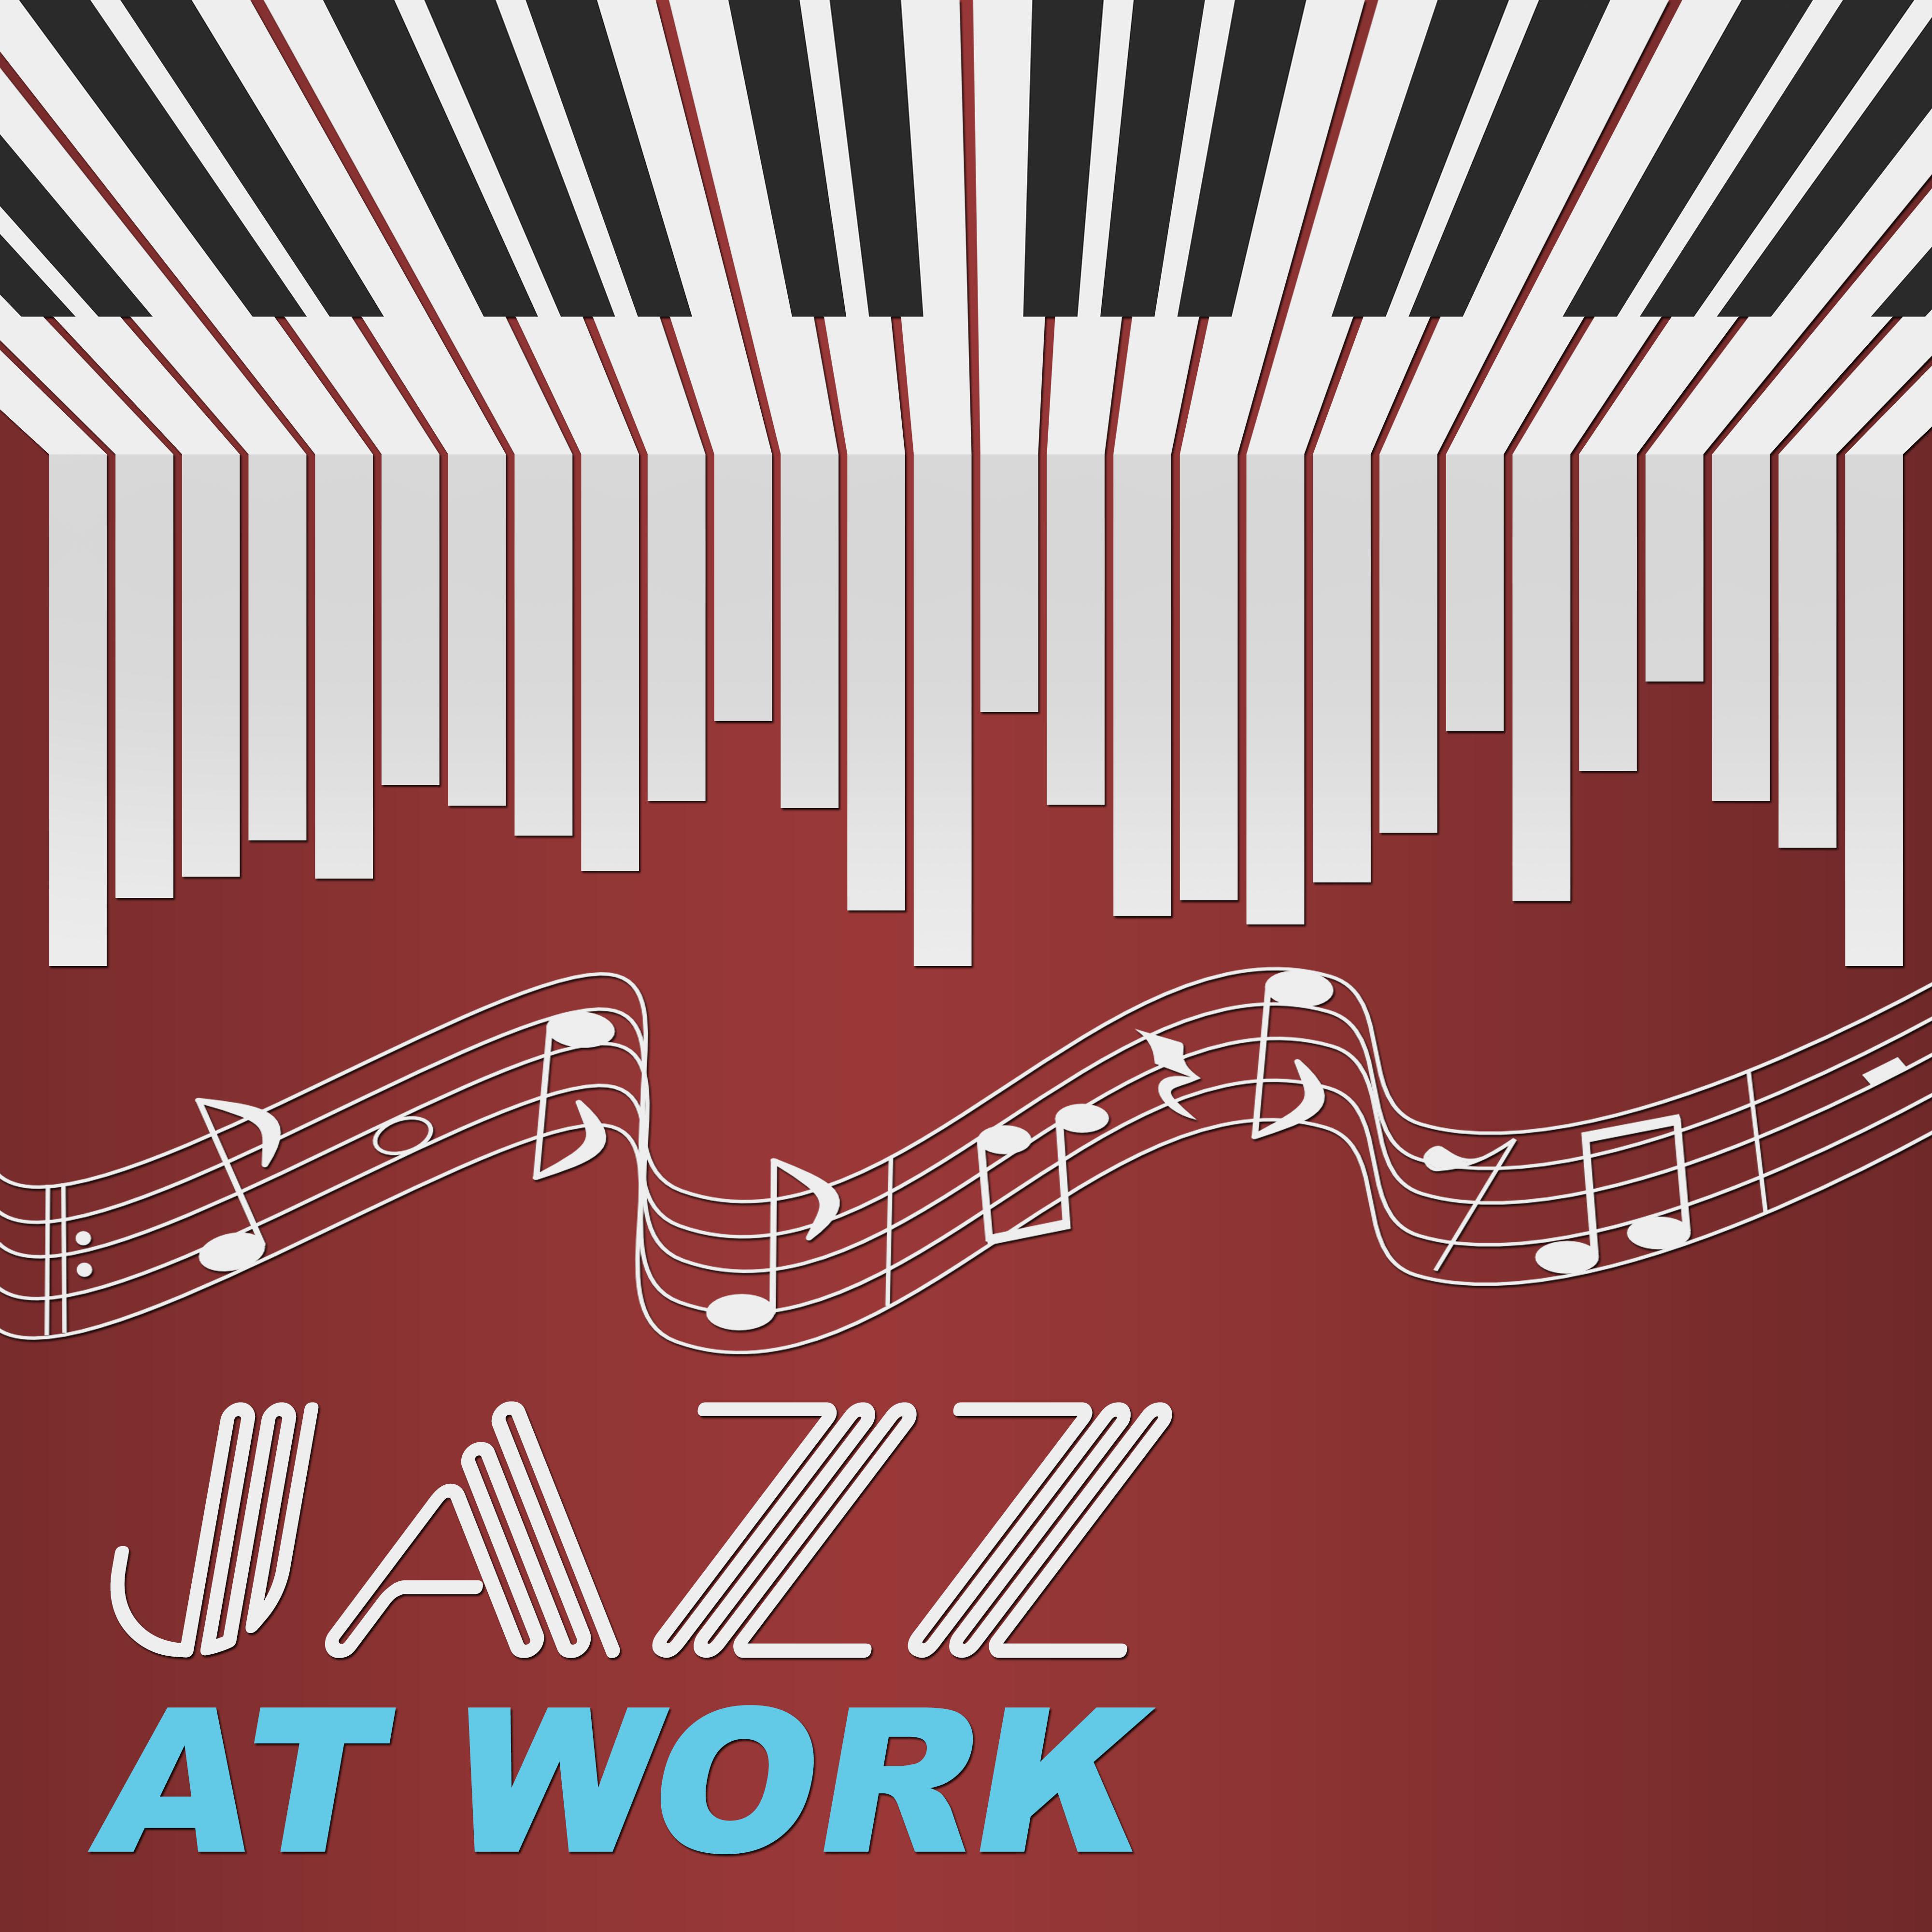 Jazz at Work – Best Ways to Relax at Work, Smooth Jazz Music, Peaceful Sounds for Relaxation, Background Sounds to Calm Down, Take a Break with Jazz